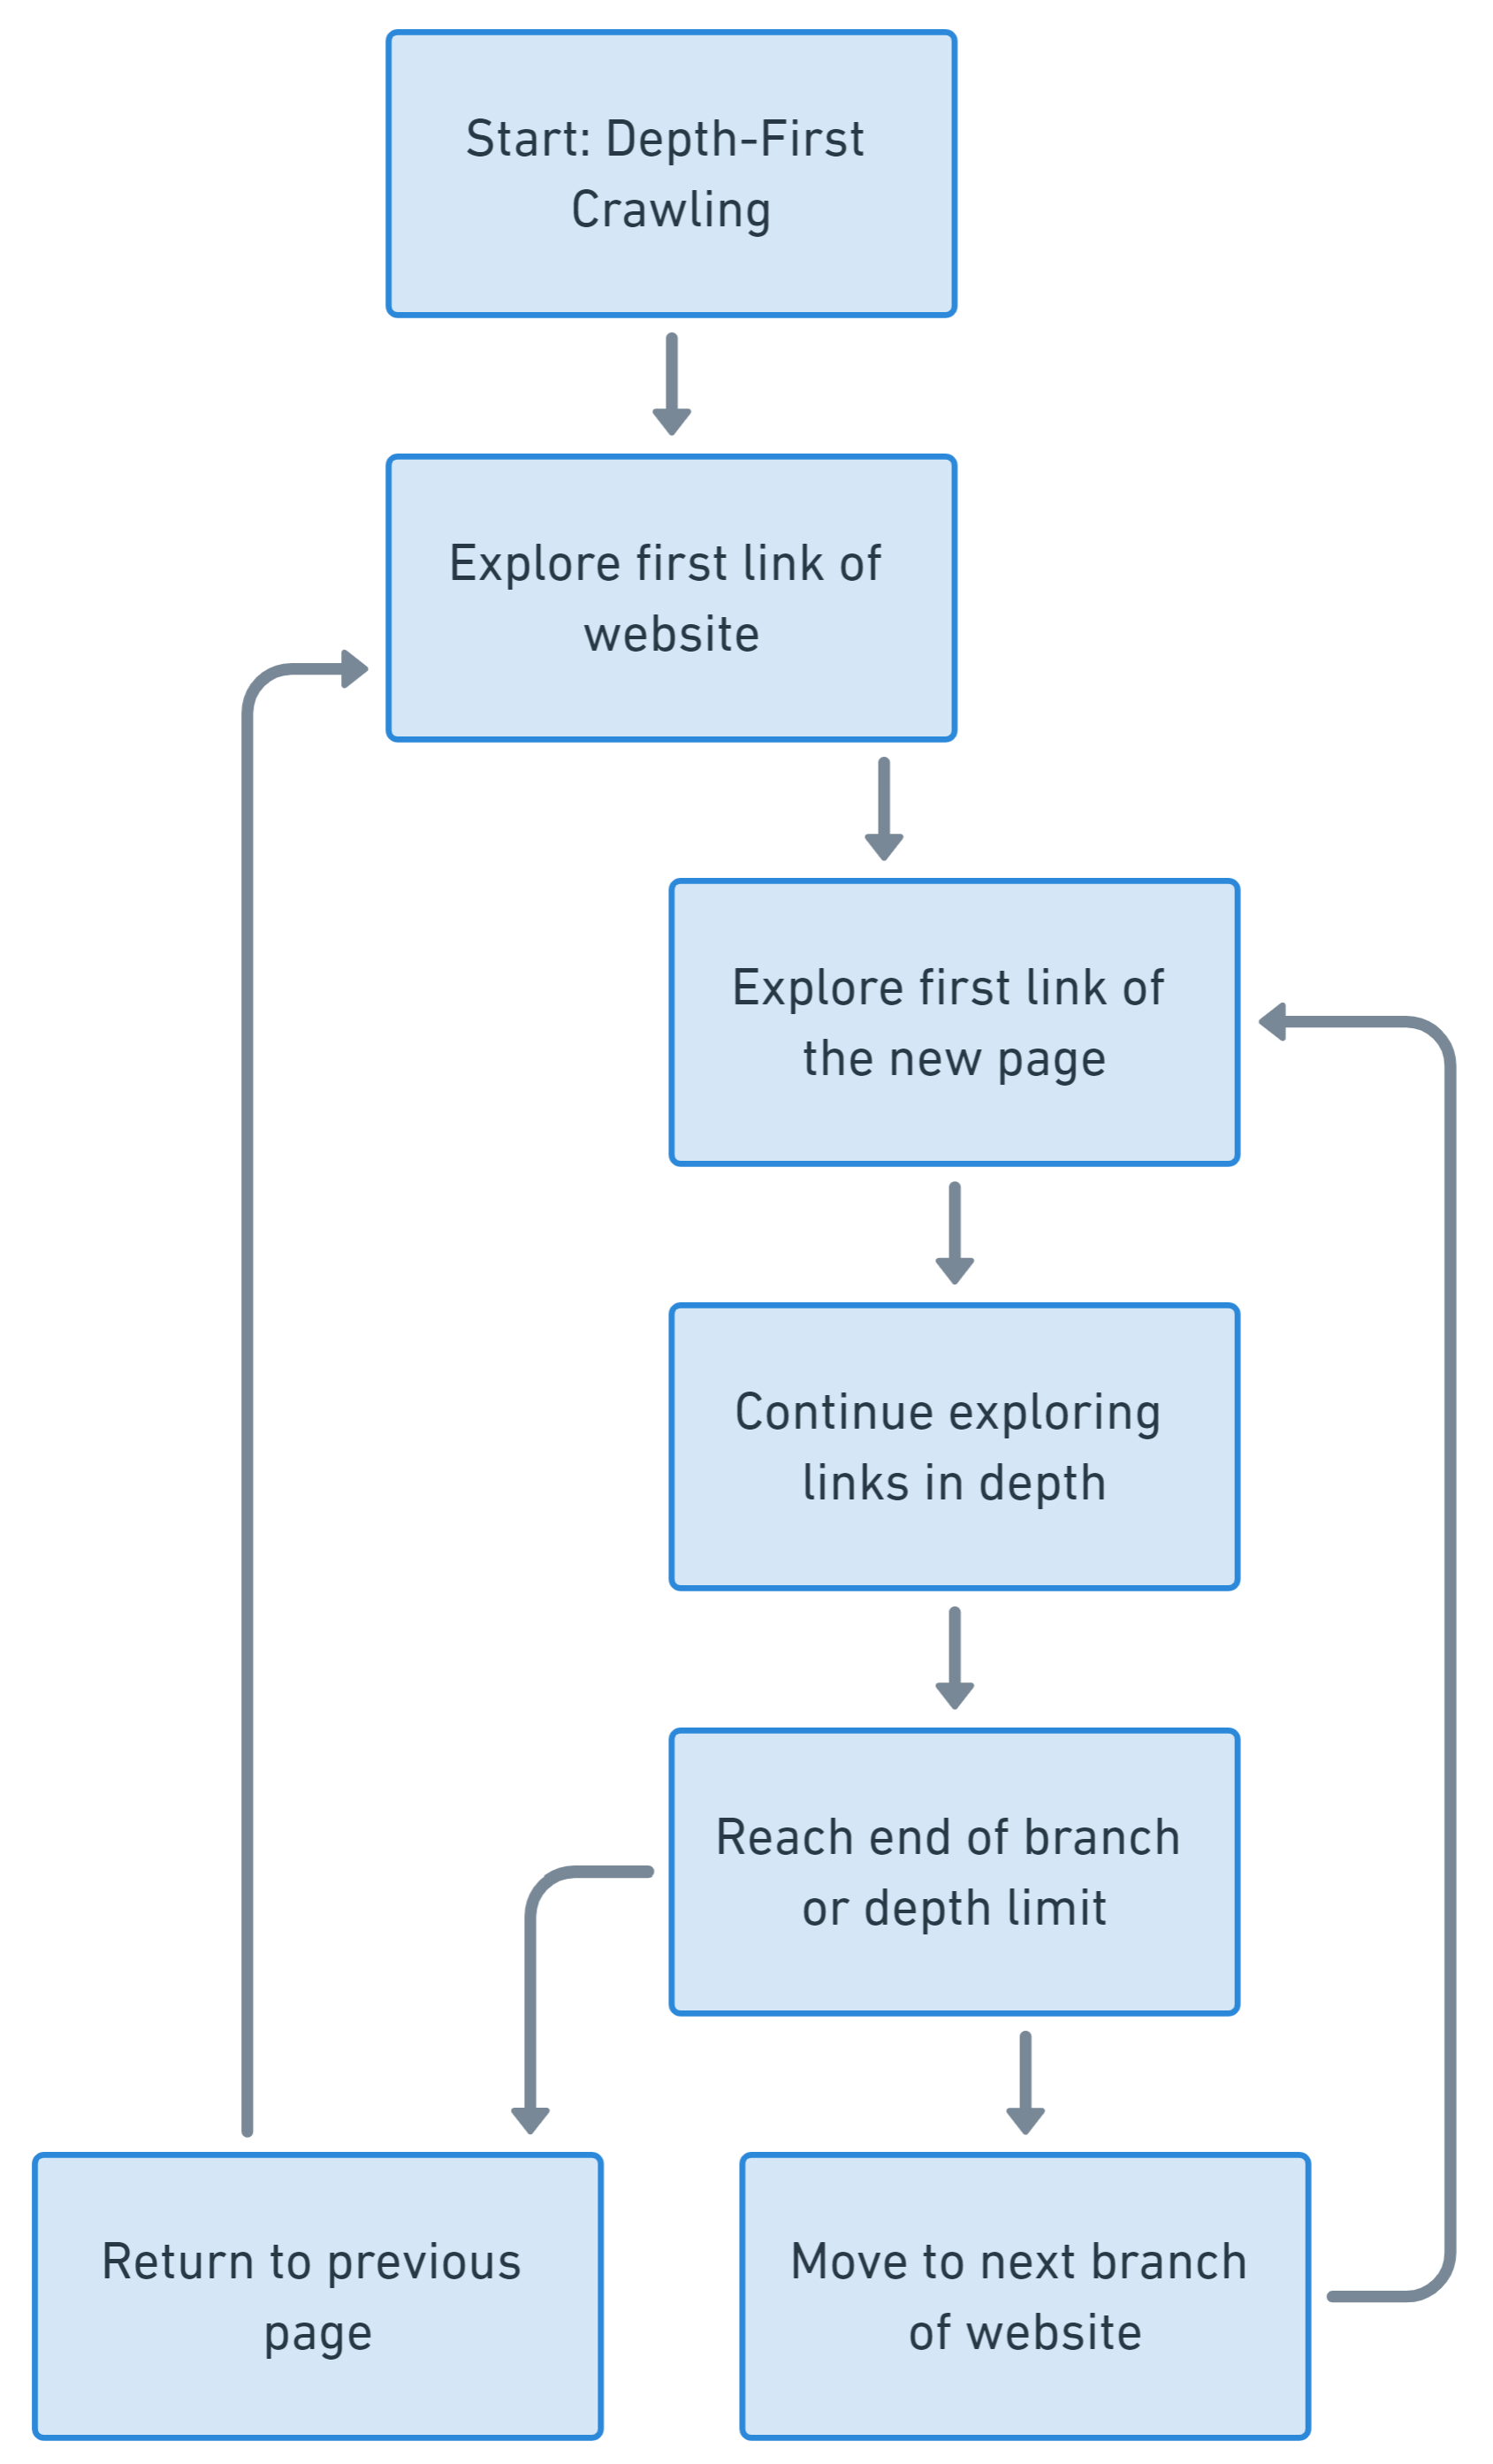 A flowchart illustrating the Depth-First Crawling process, where each branch is traversed to the end of its depth before moving on to the next branch.